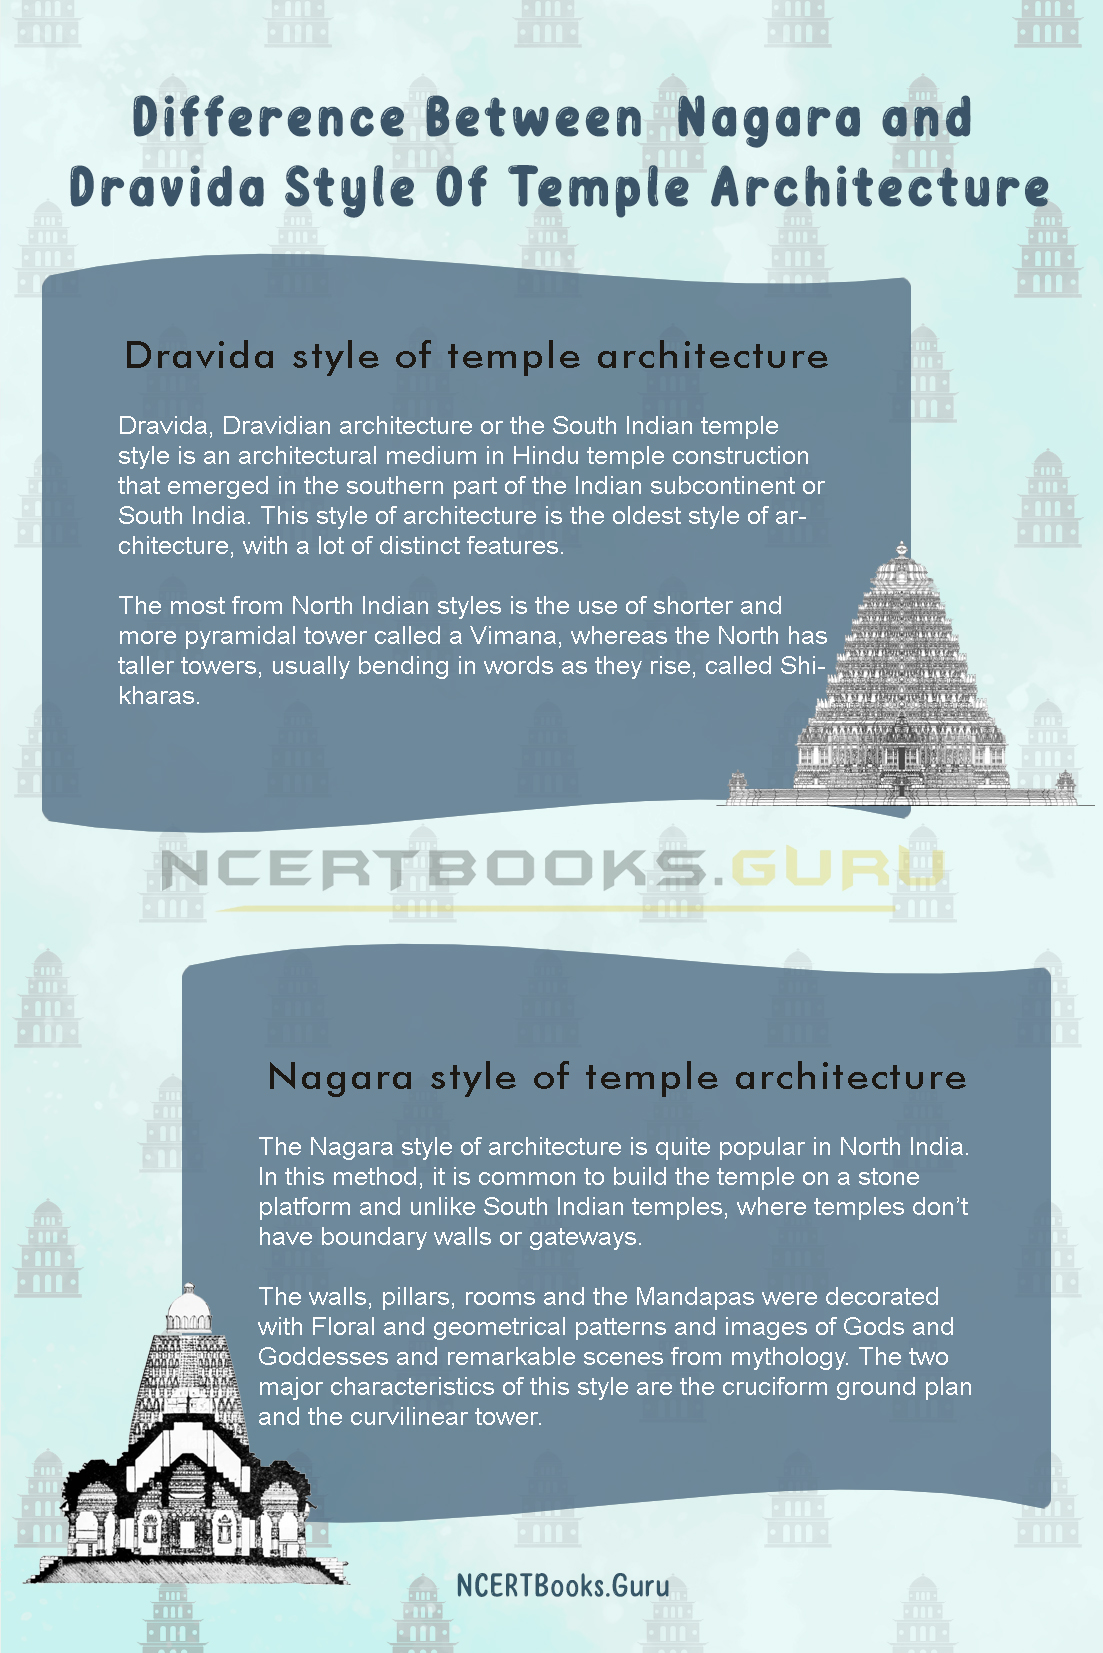 Difference between Nagara and Dravida style of architecture 1